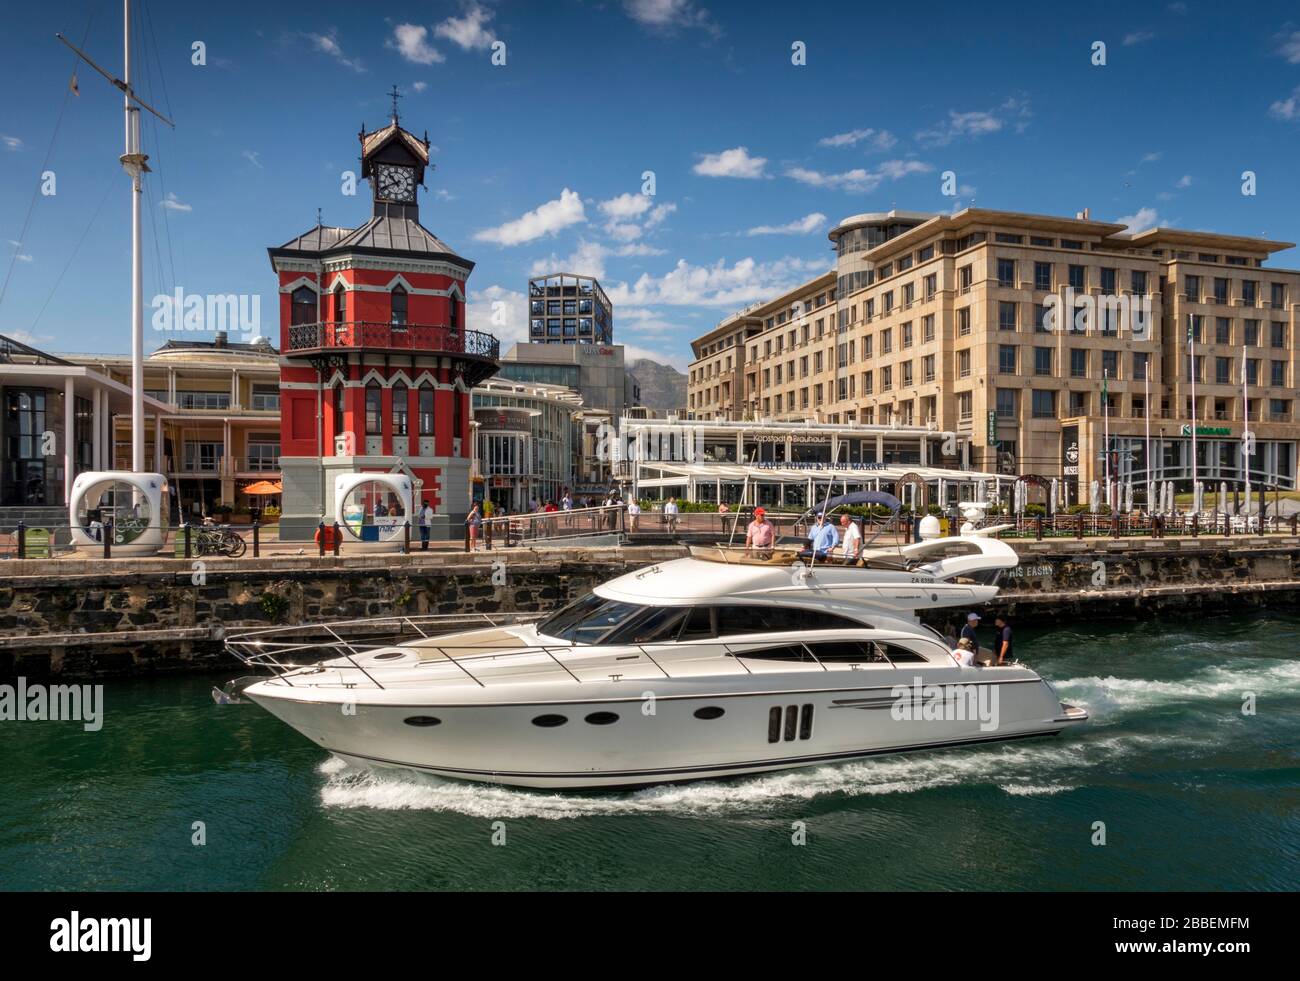 South Africa, Western Cape, Cape Town, Victoria and Alfred Waterfront, expensive motor boat passing swing bridge at historic clock tower Stock Photo